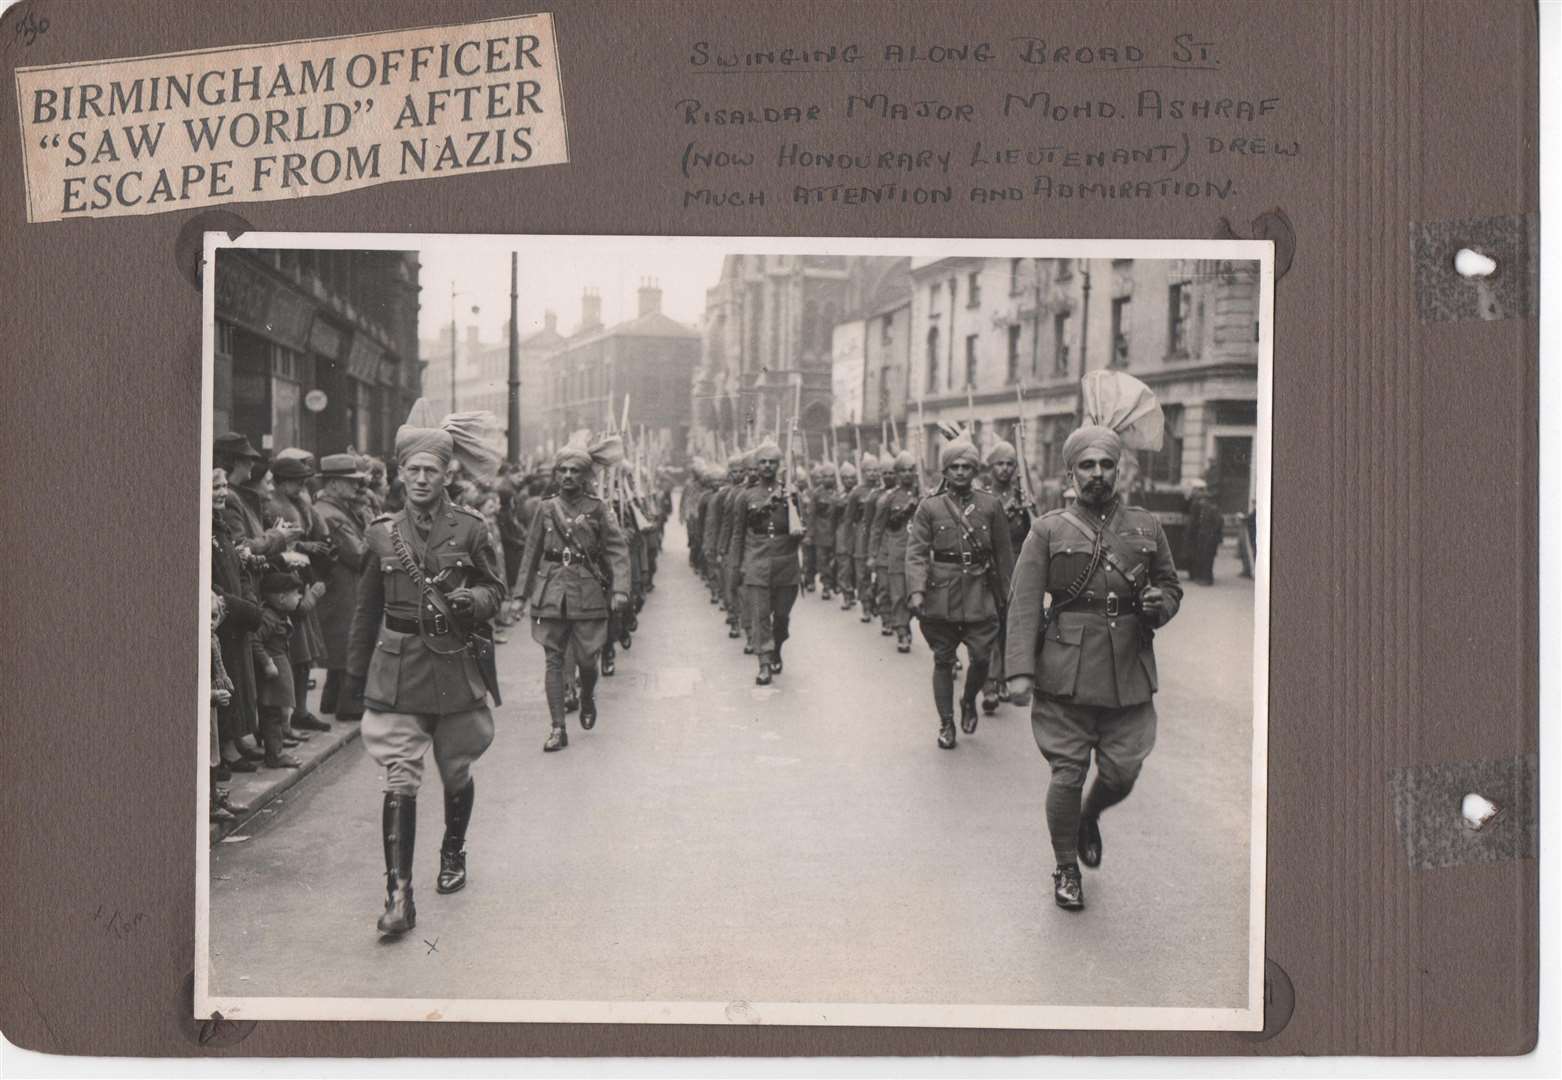 Lieut Thomas Hexley marching with the Indian Contingent through the streets of Birmingham in 1941.